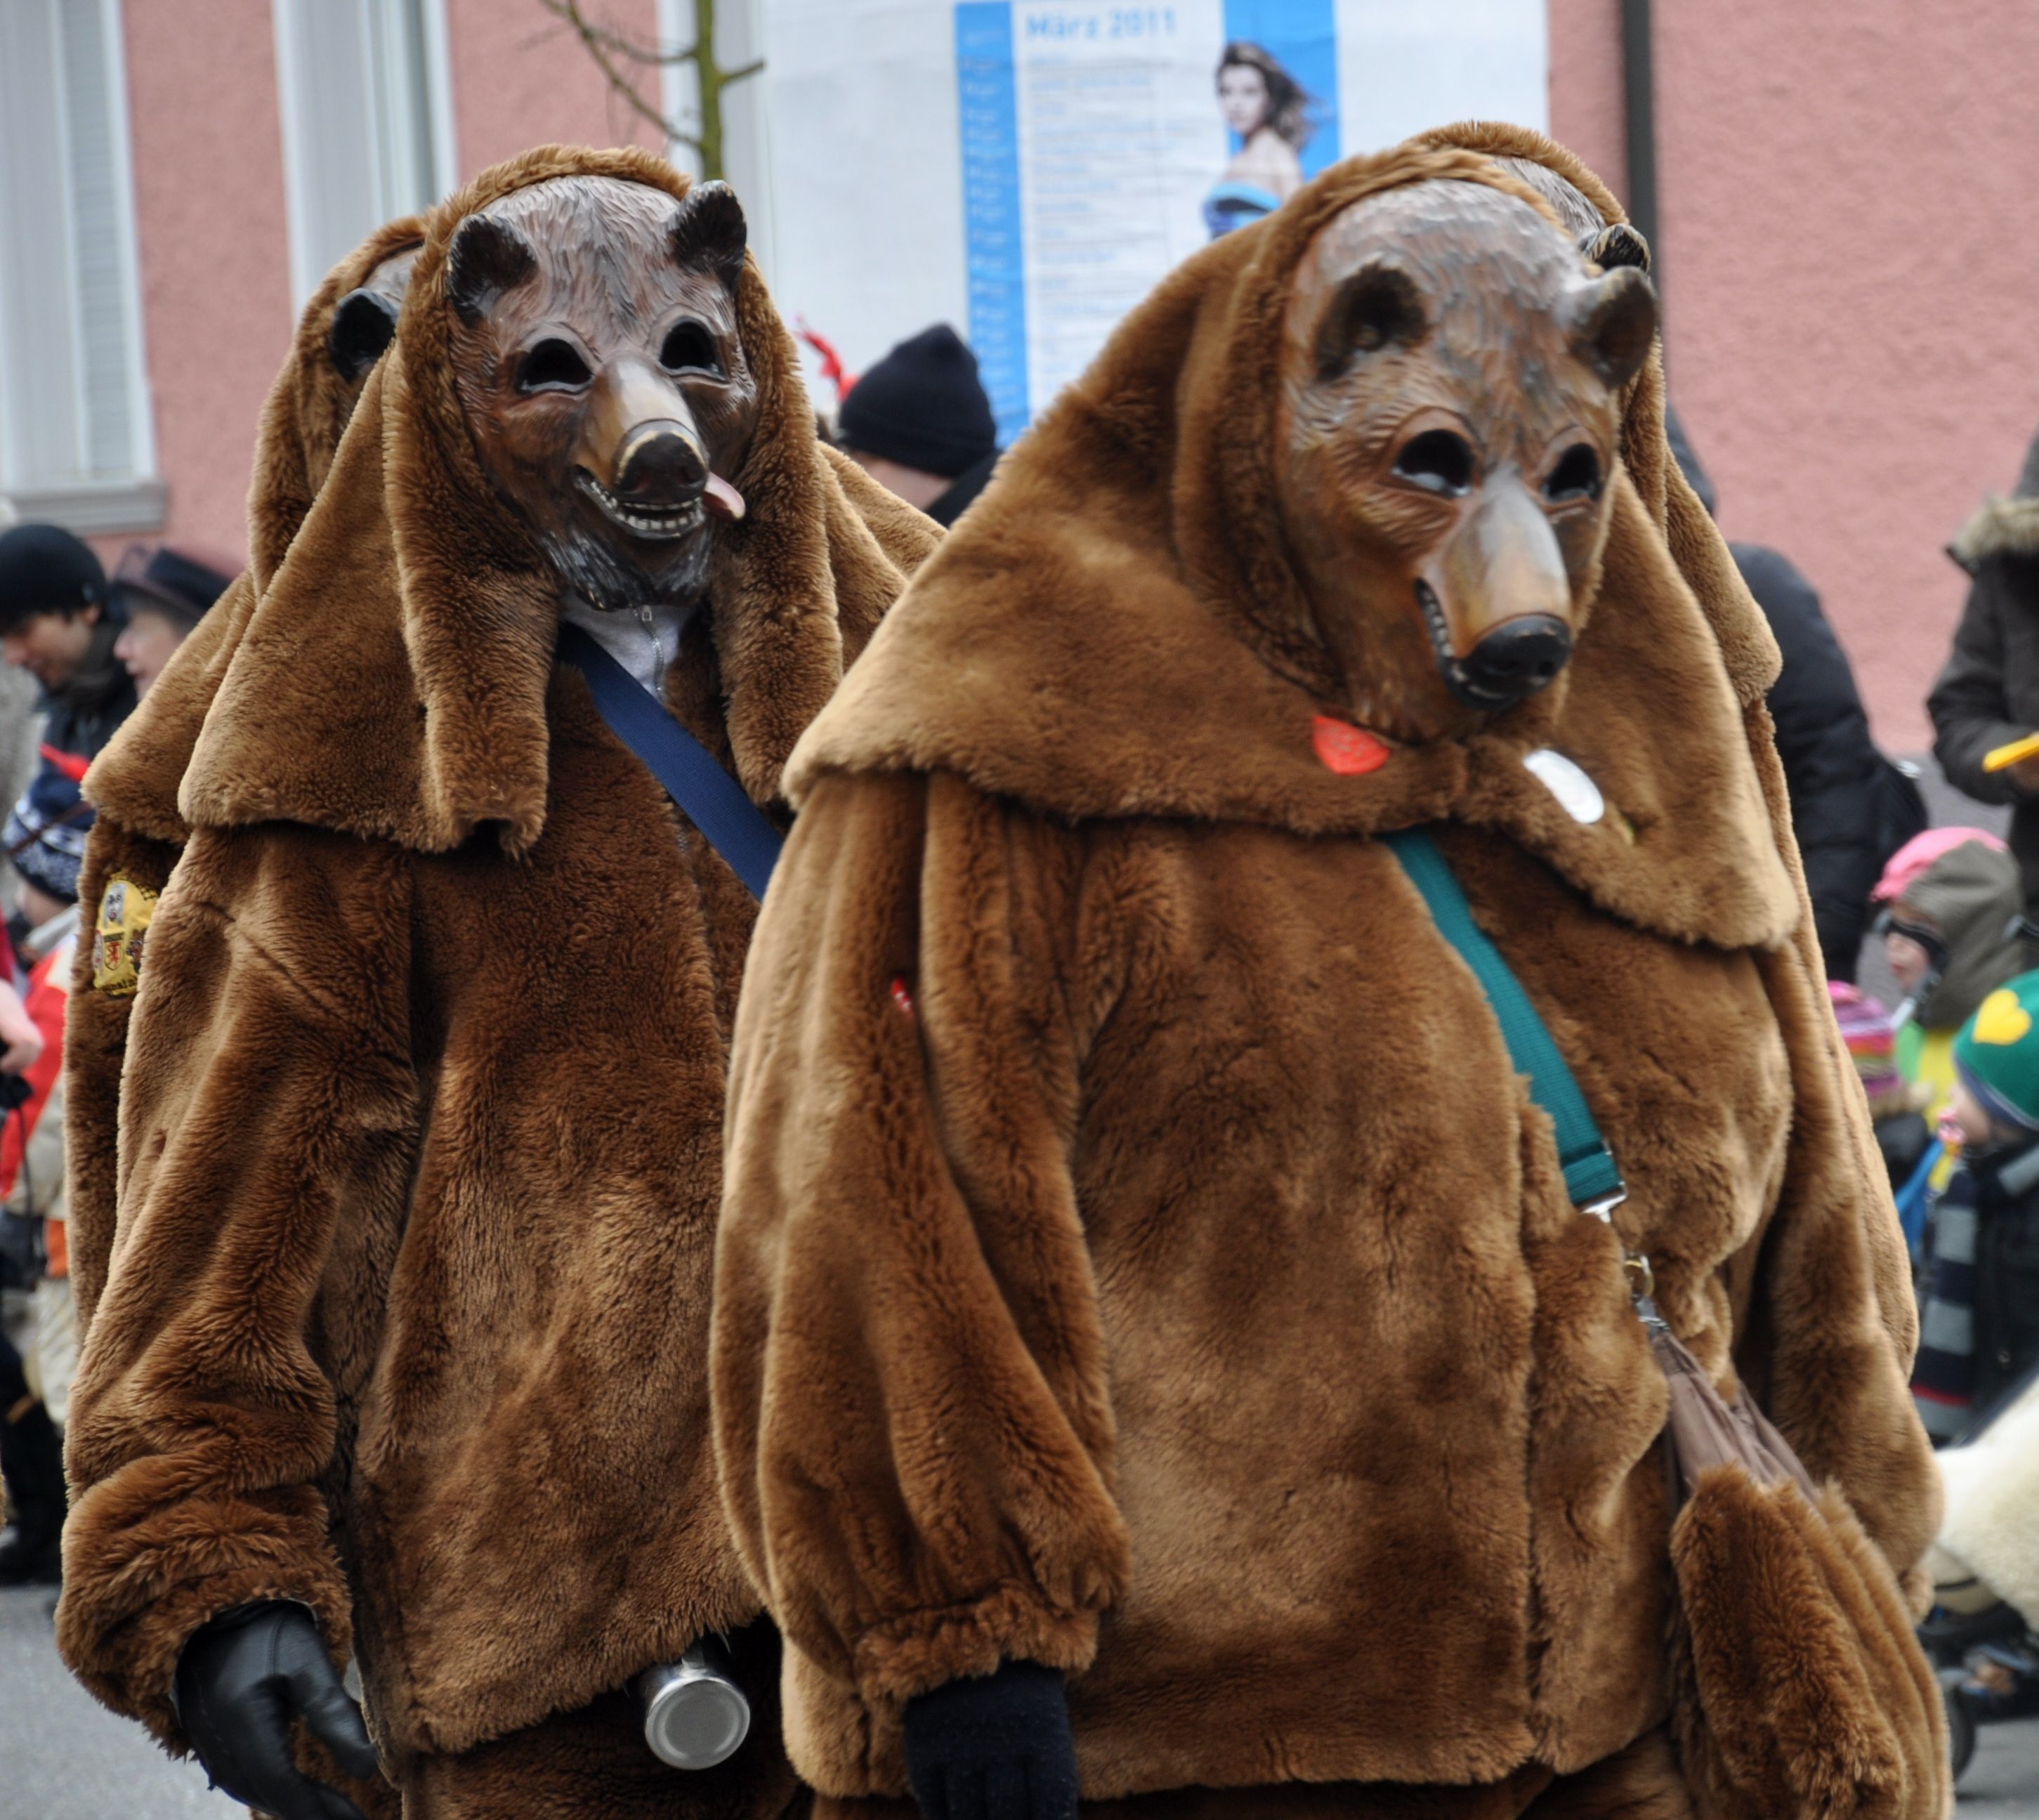 A photograph of a procession of figures (at least three) in brown bear costumes with colorful buttons and cross-shoulder bags.